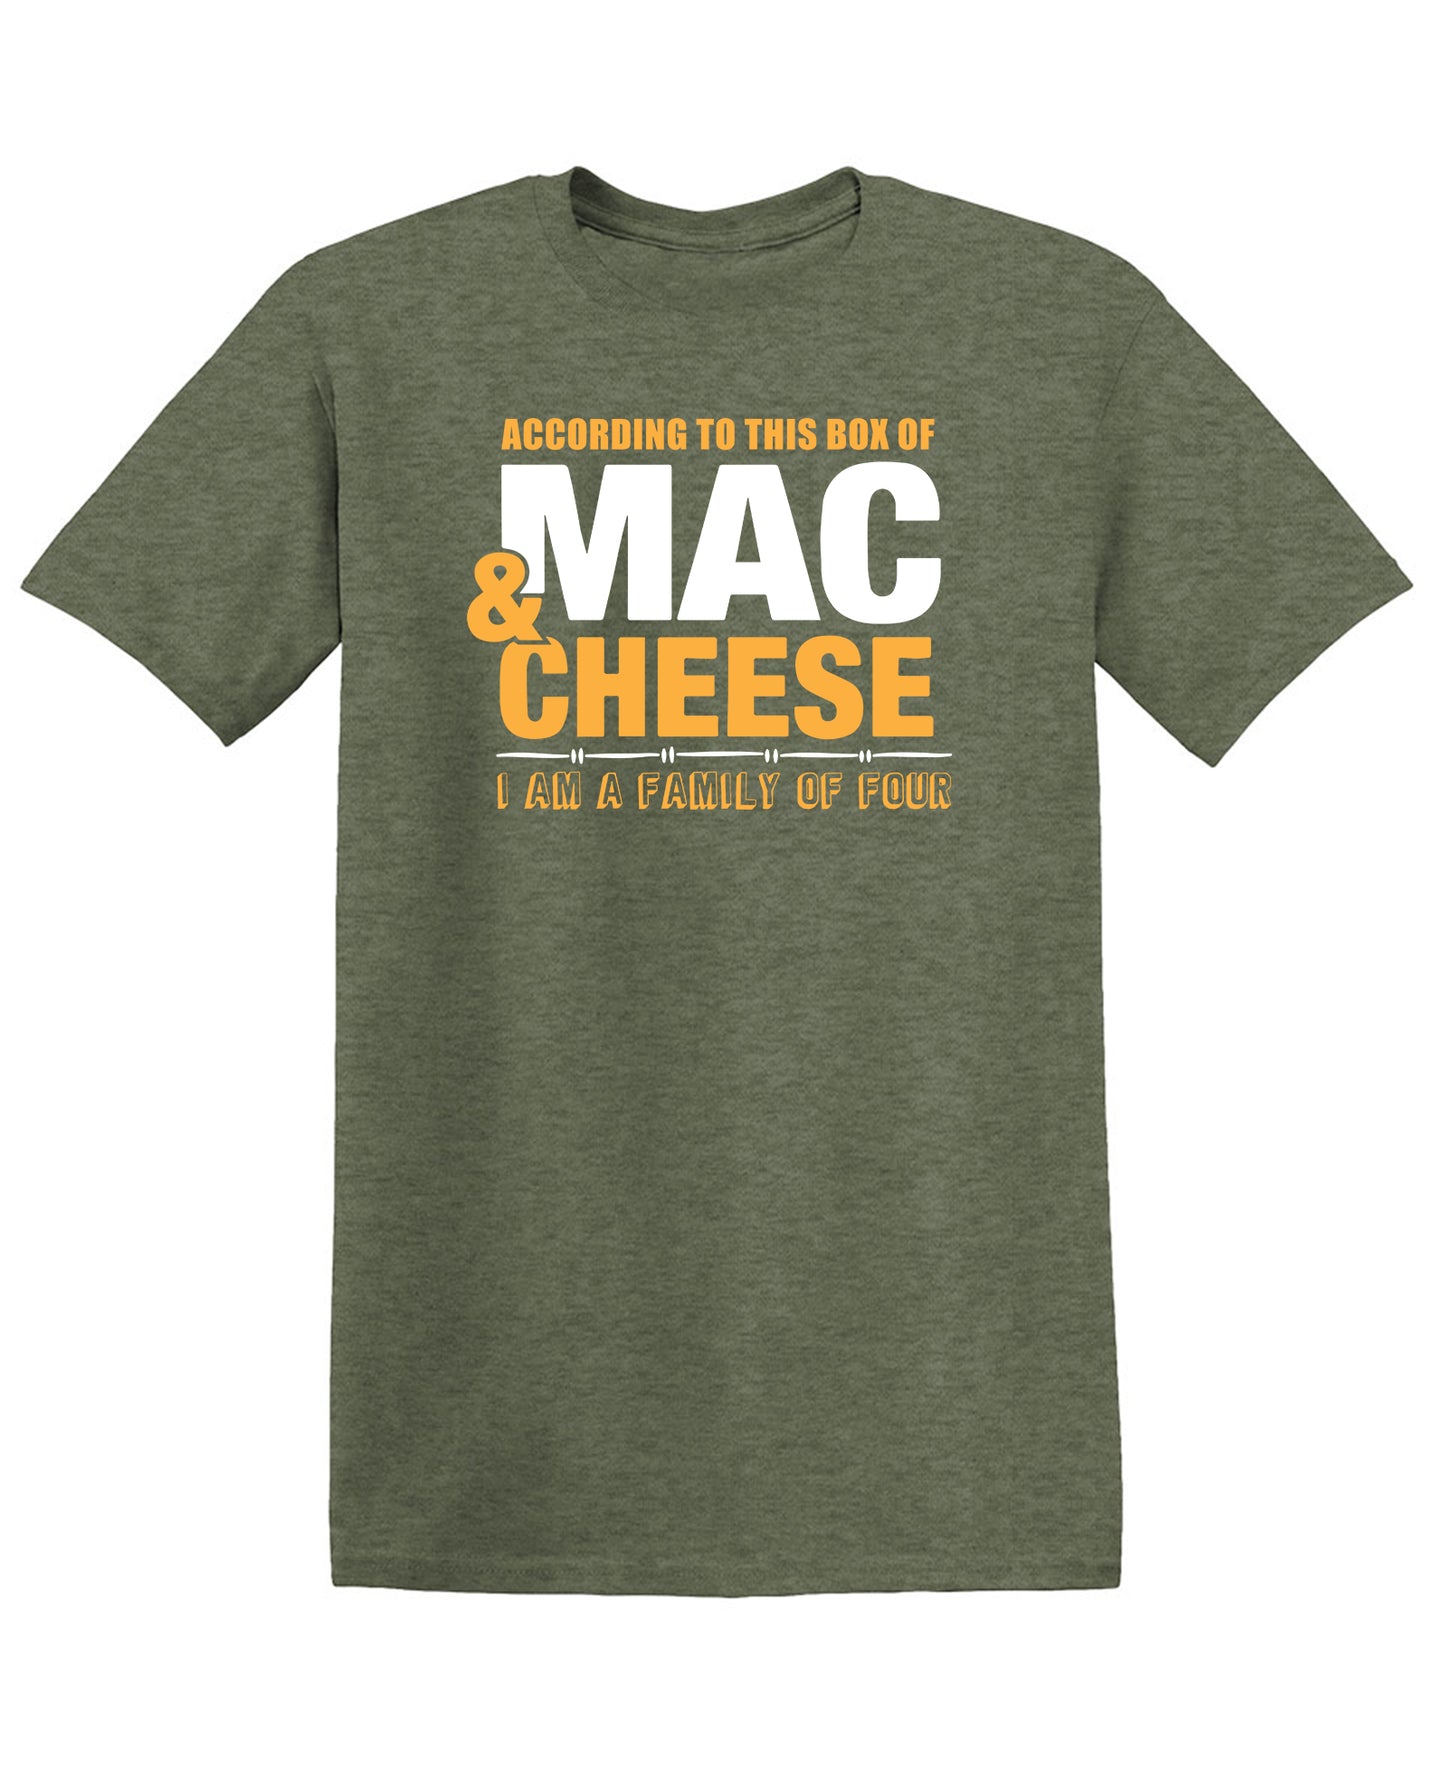 According to This Box of Mac n Cheese, I am a Family of Four - Funny T Shirts & Graphic Tees